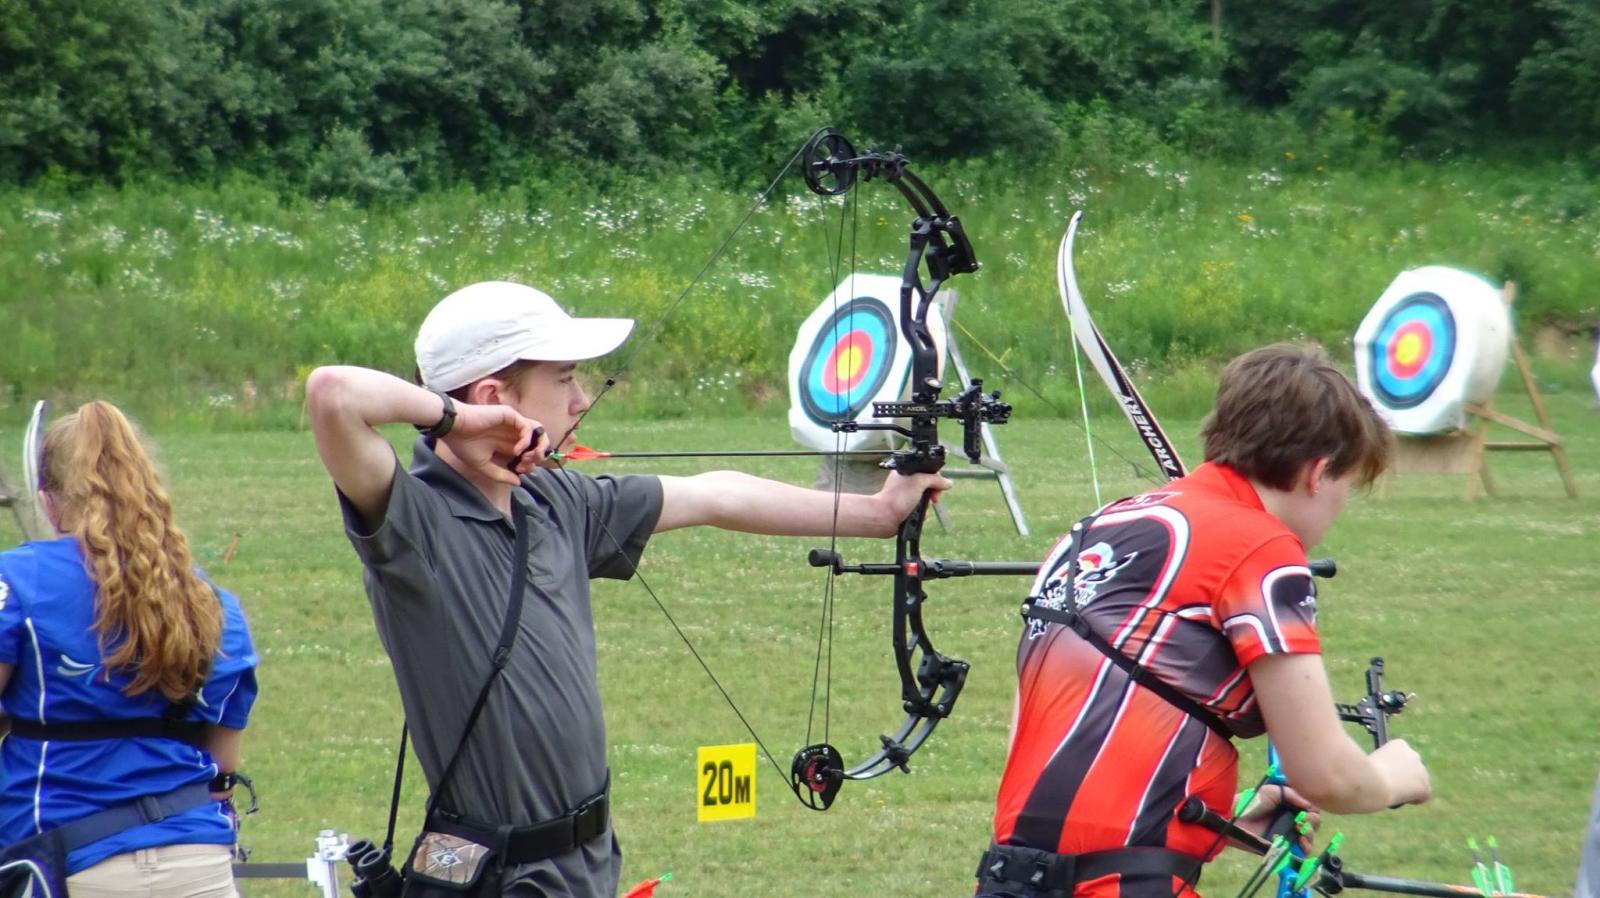 Man pointing bow at outdoor archery target